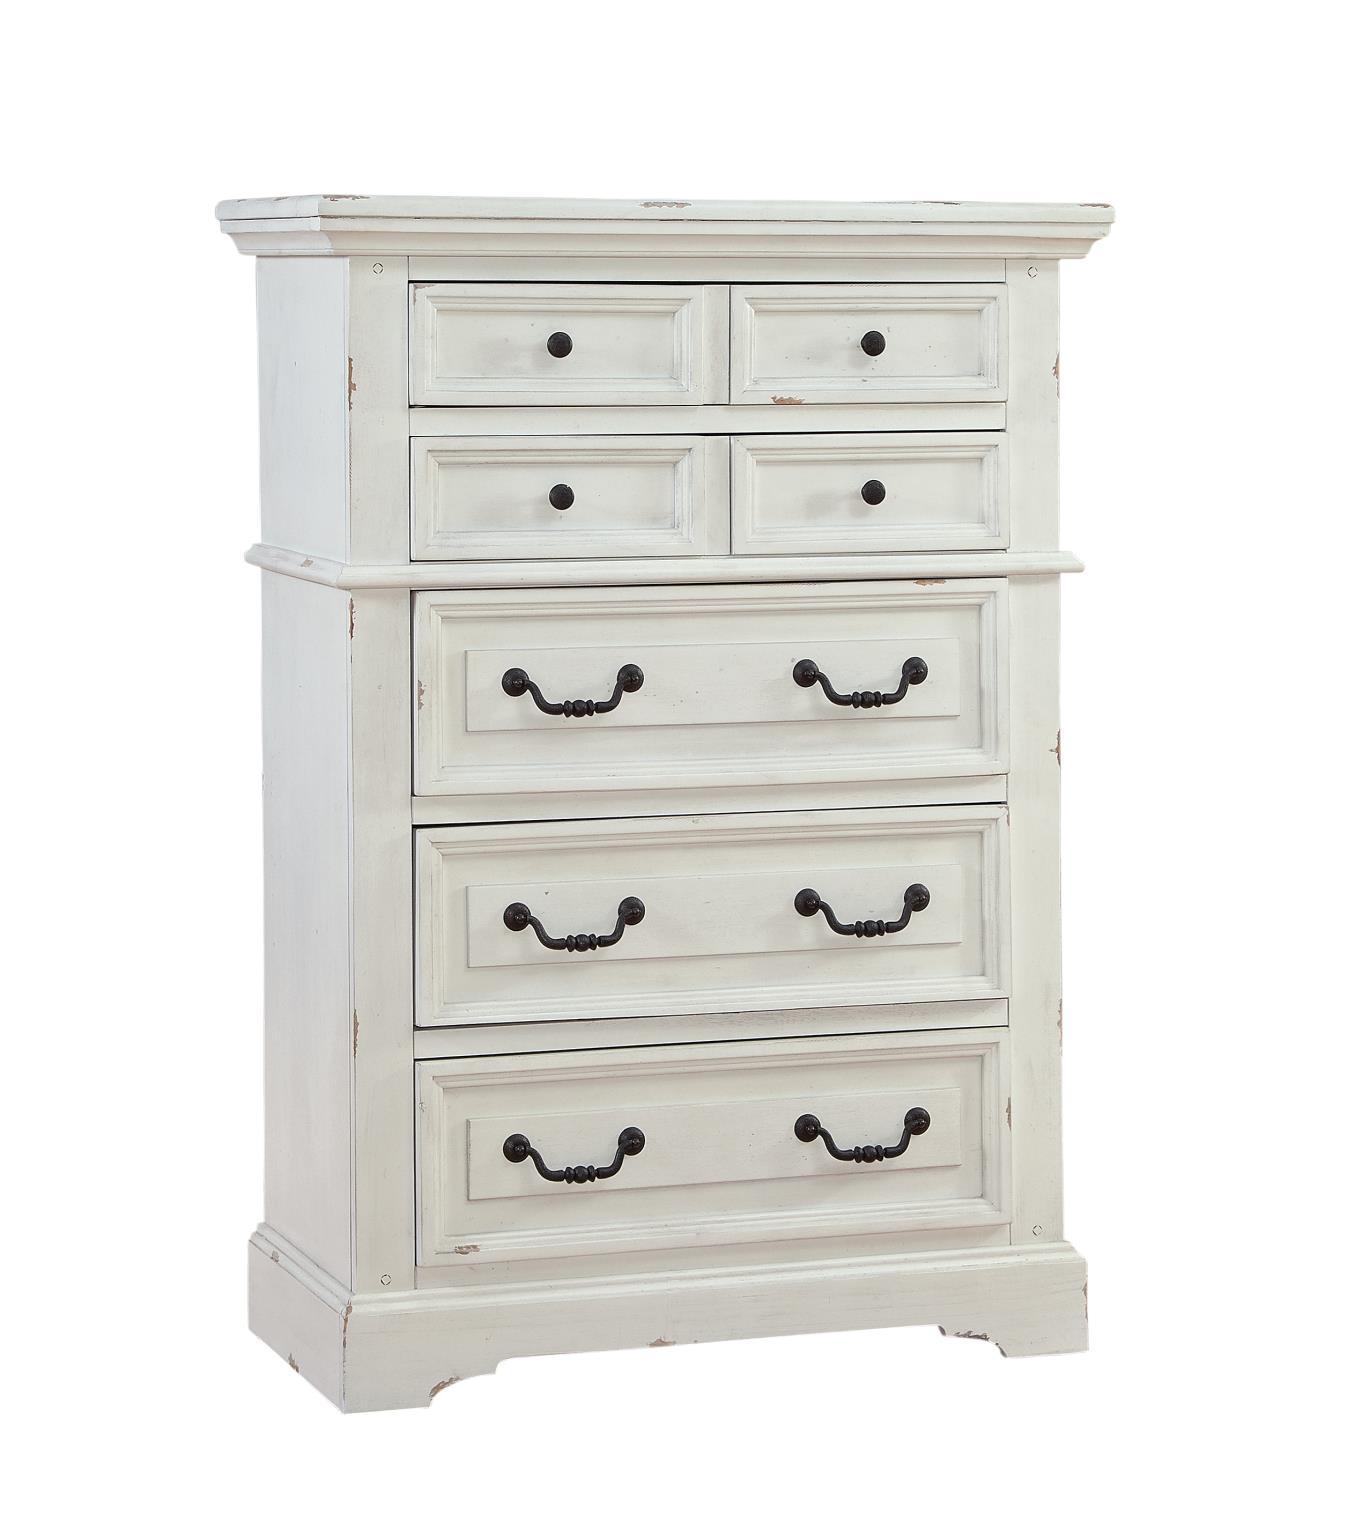 Classic, Traditional Chest 7810 STONEBROOK 7810-150 in Antique White 